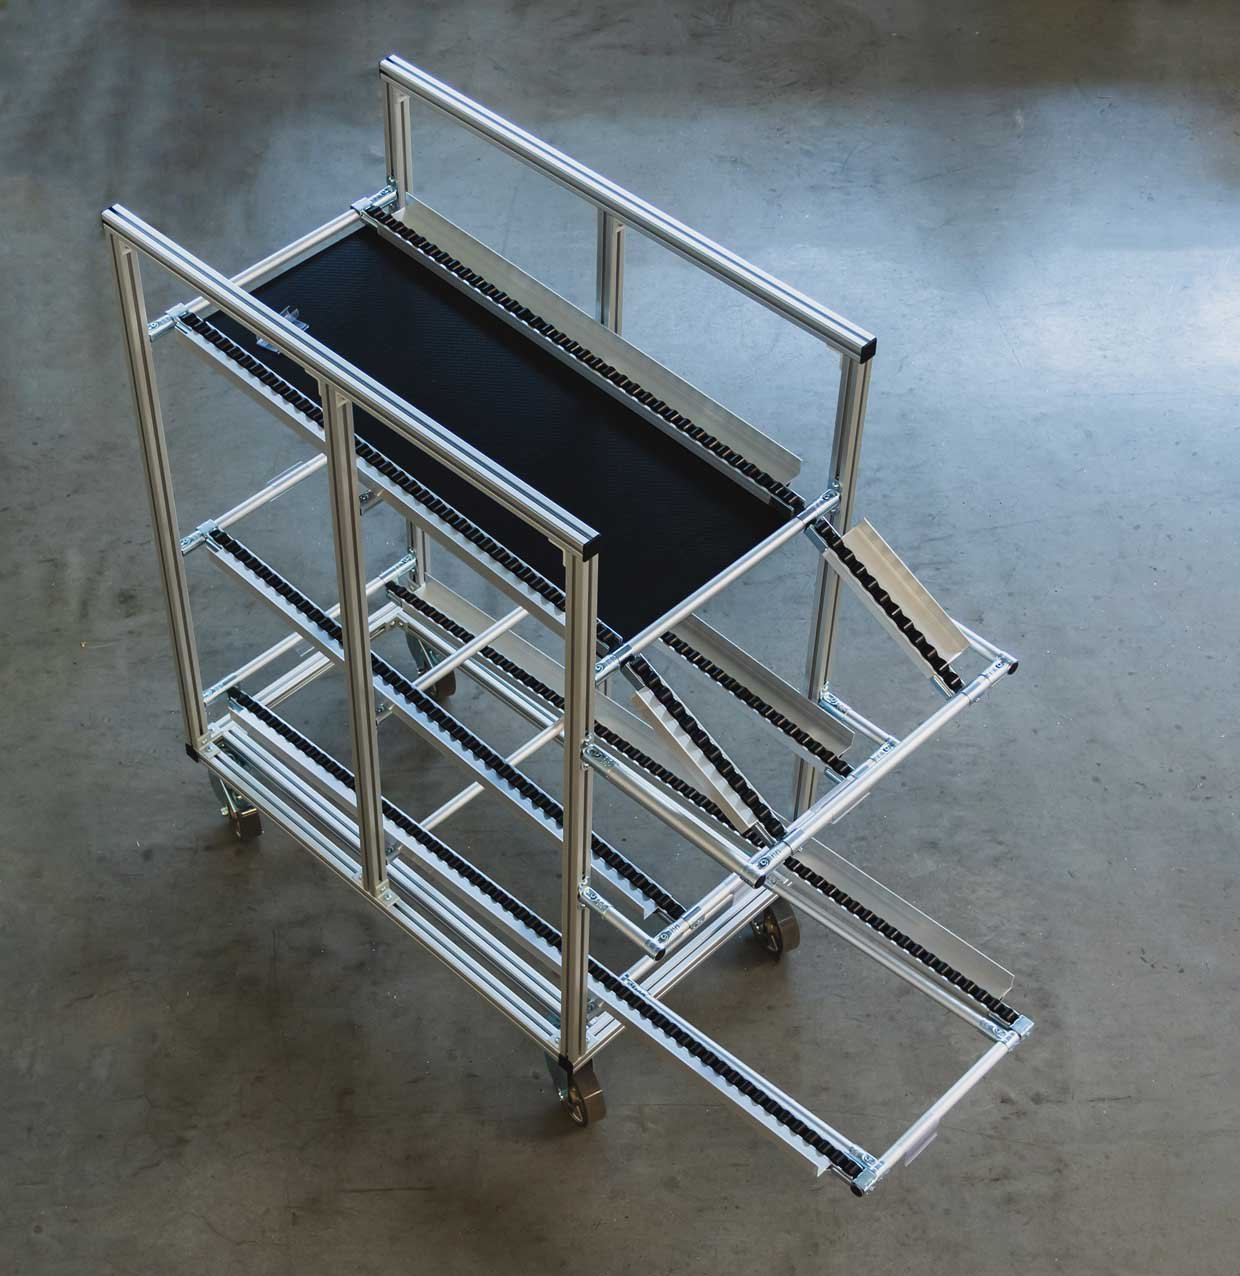 A mobile flow rack with roller tracks and a base frame made of aluminum square pipes.